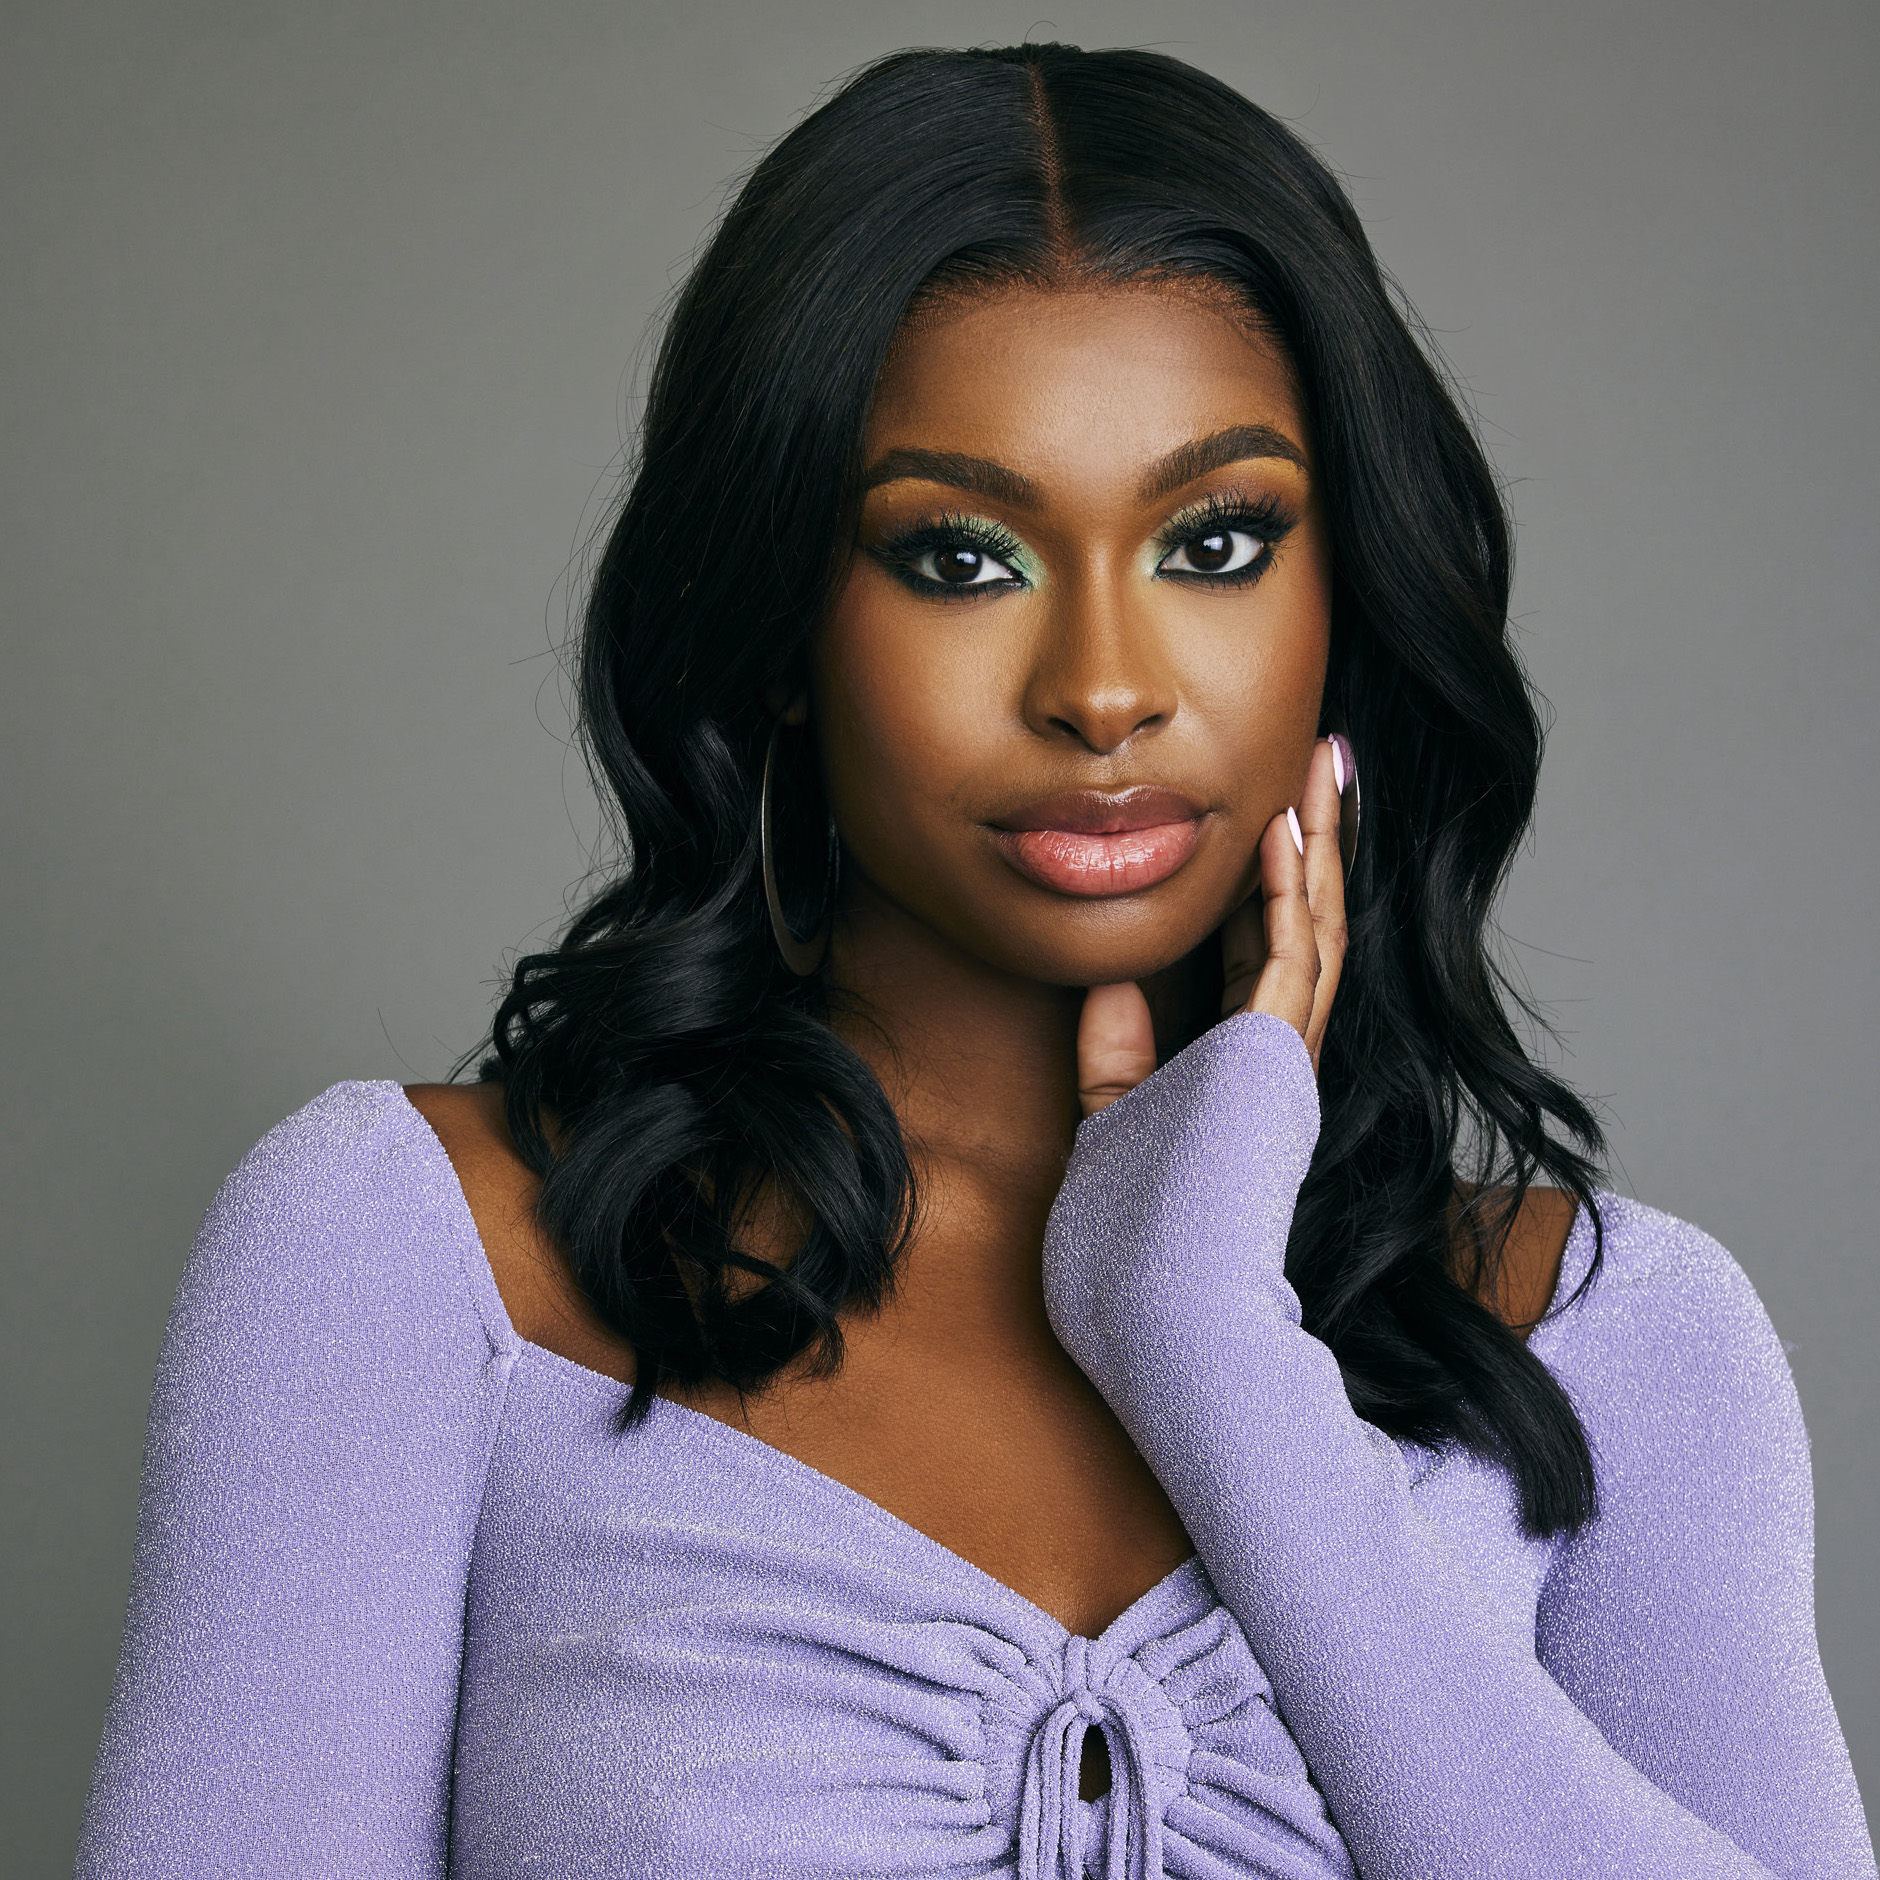 Bel-Air' Star Coco Jones Dishes on Season 2 and Life Behind the